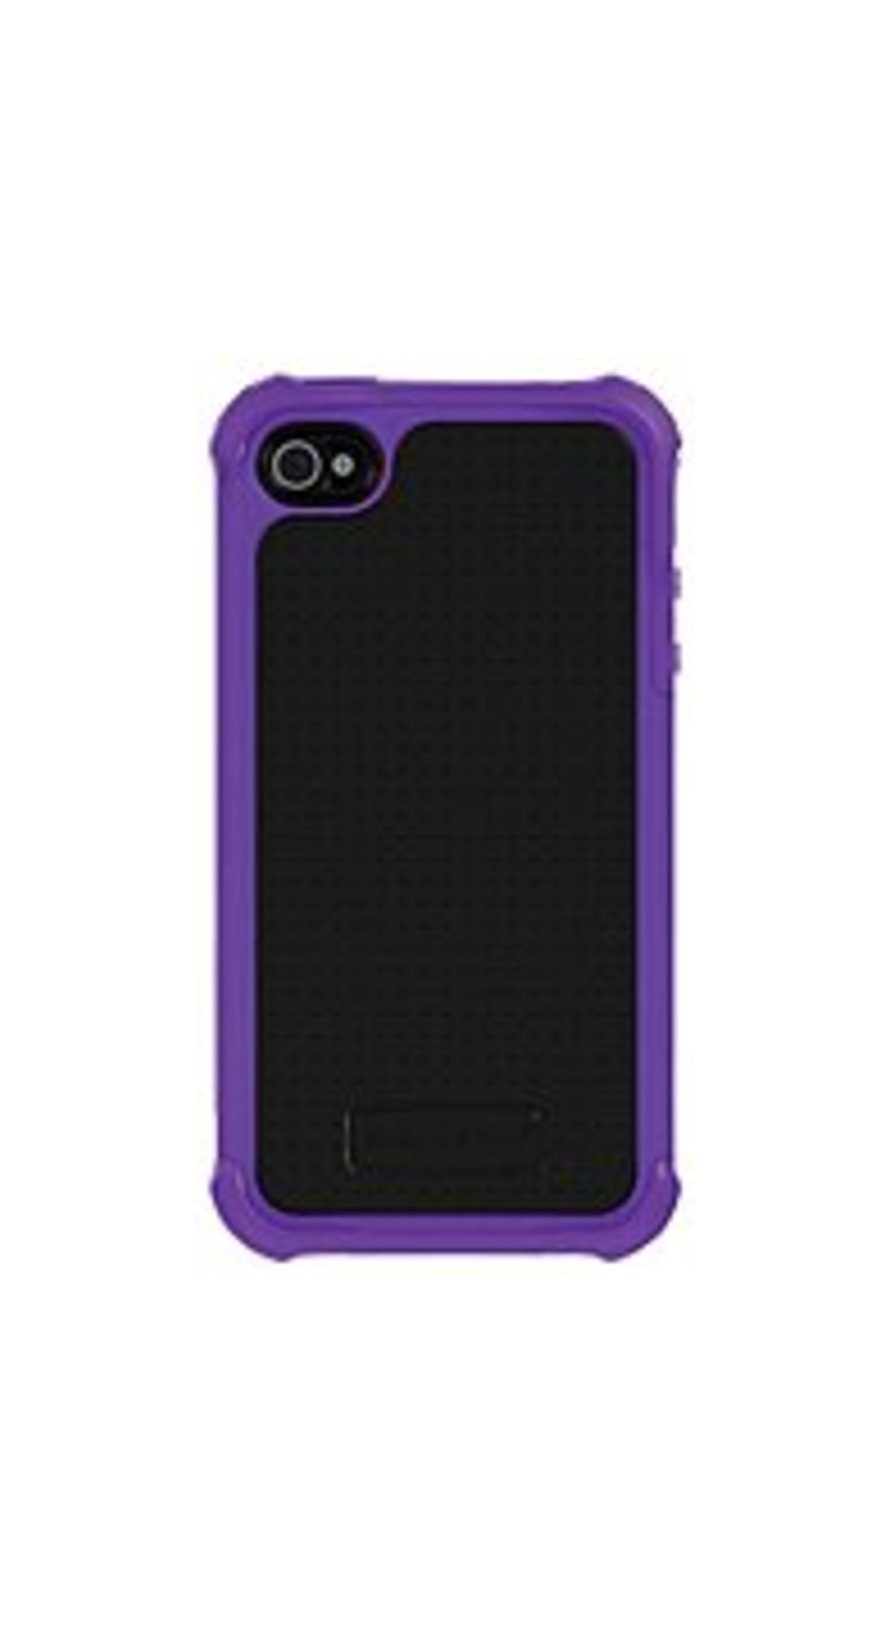 Ballistic SA0582-M665 Soft Gel Case for iPhone 4 and 4S - Purple, Black